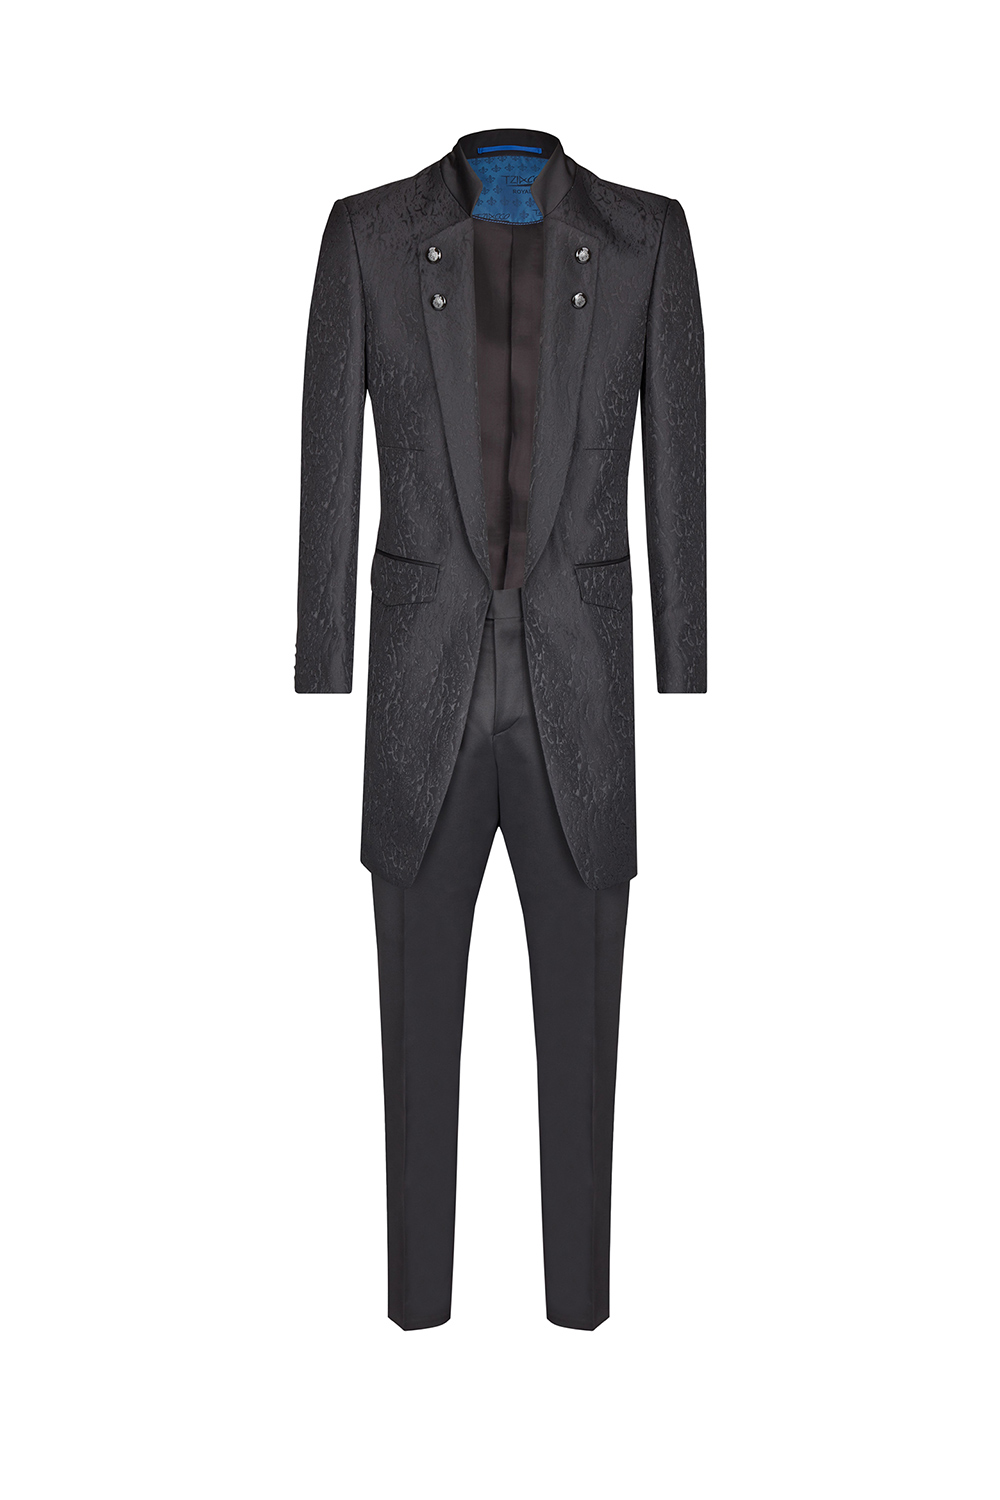 Royal Black Long 2 Piece Suit - Tom Murphy's Formal and Menswear